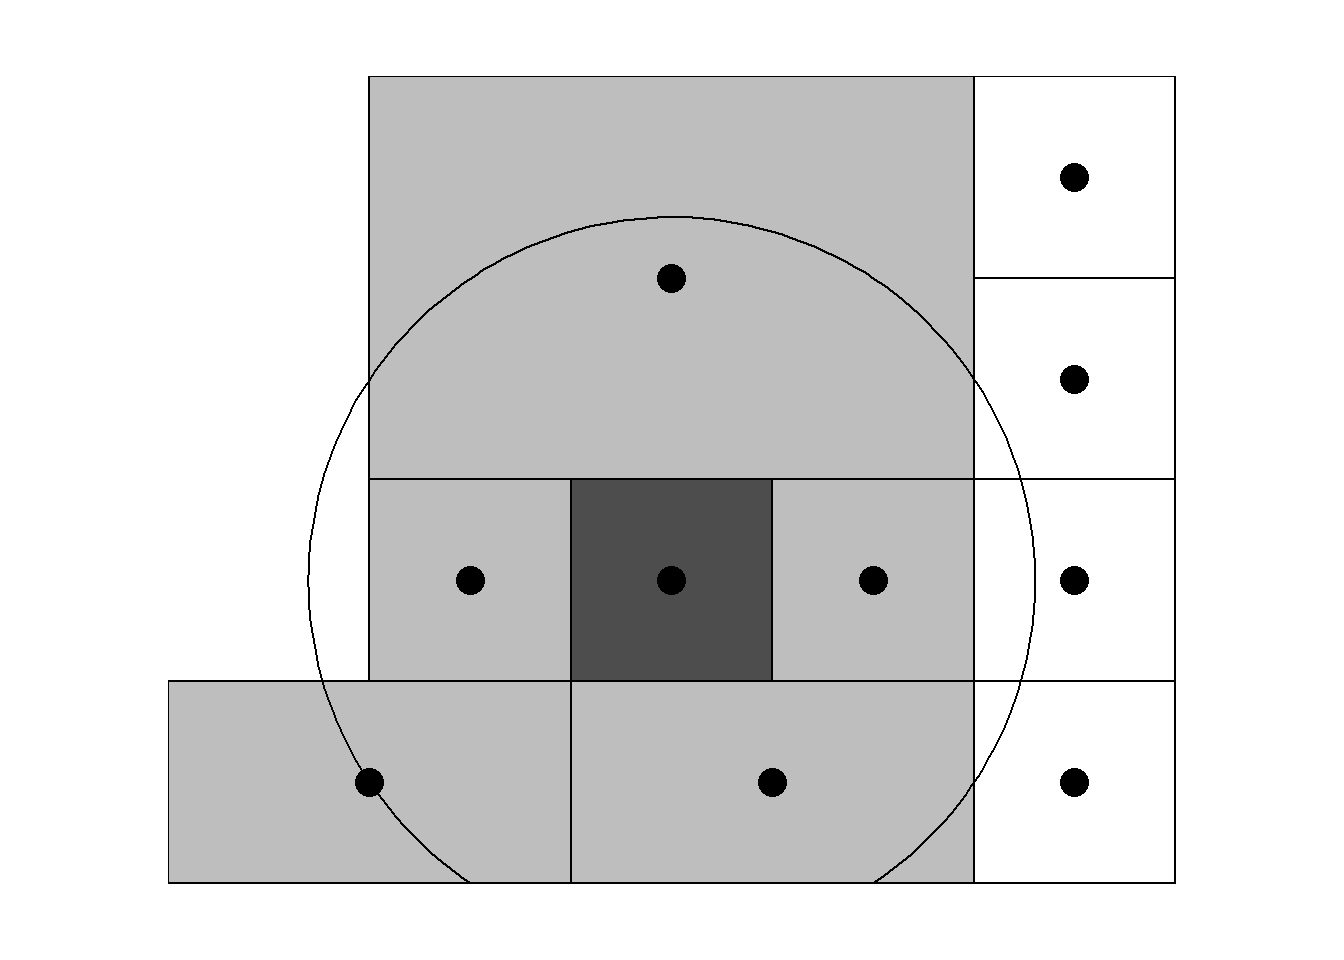 Left: Neighbors based on distance. Area of interest is represented in black and its neighbors in gray. Circle's center is the centroid of the area of interest, and circle's radius is the distance. Right: Map of neighbors separated by a distance less than 0.4.